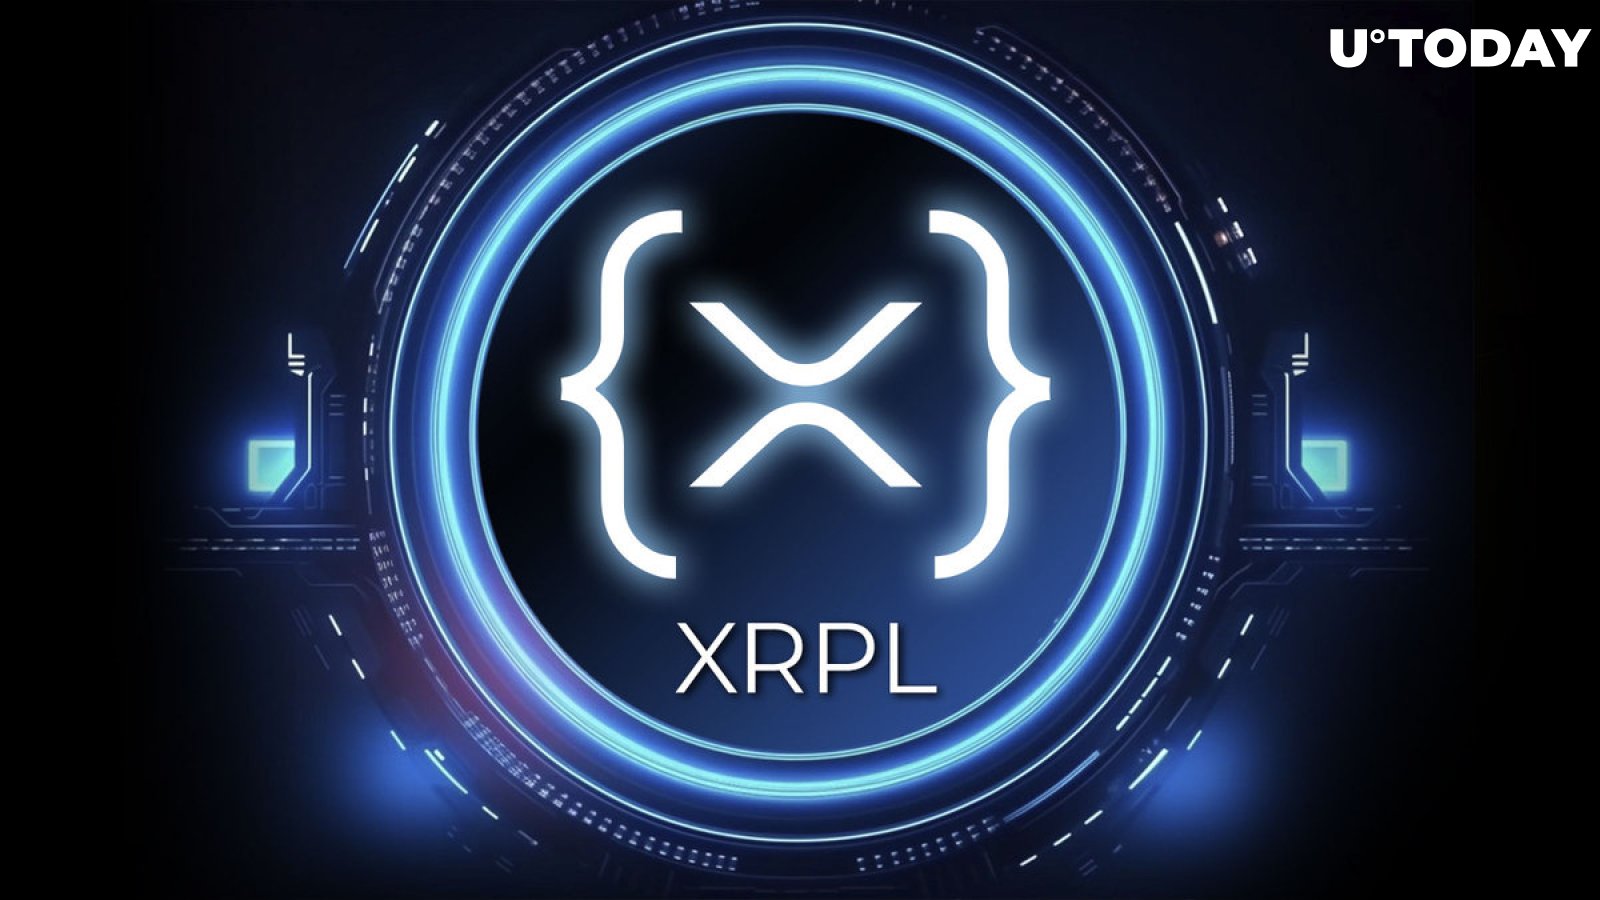 XRP Ledger sets a new standard for the lending giant;  Here's what you need to know